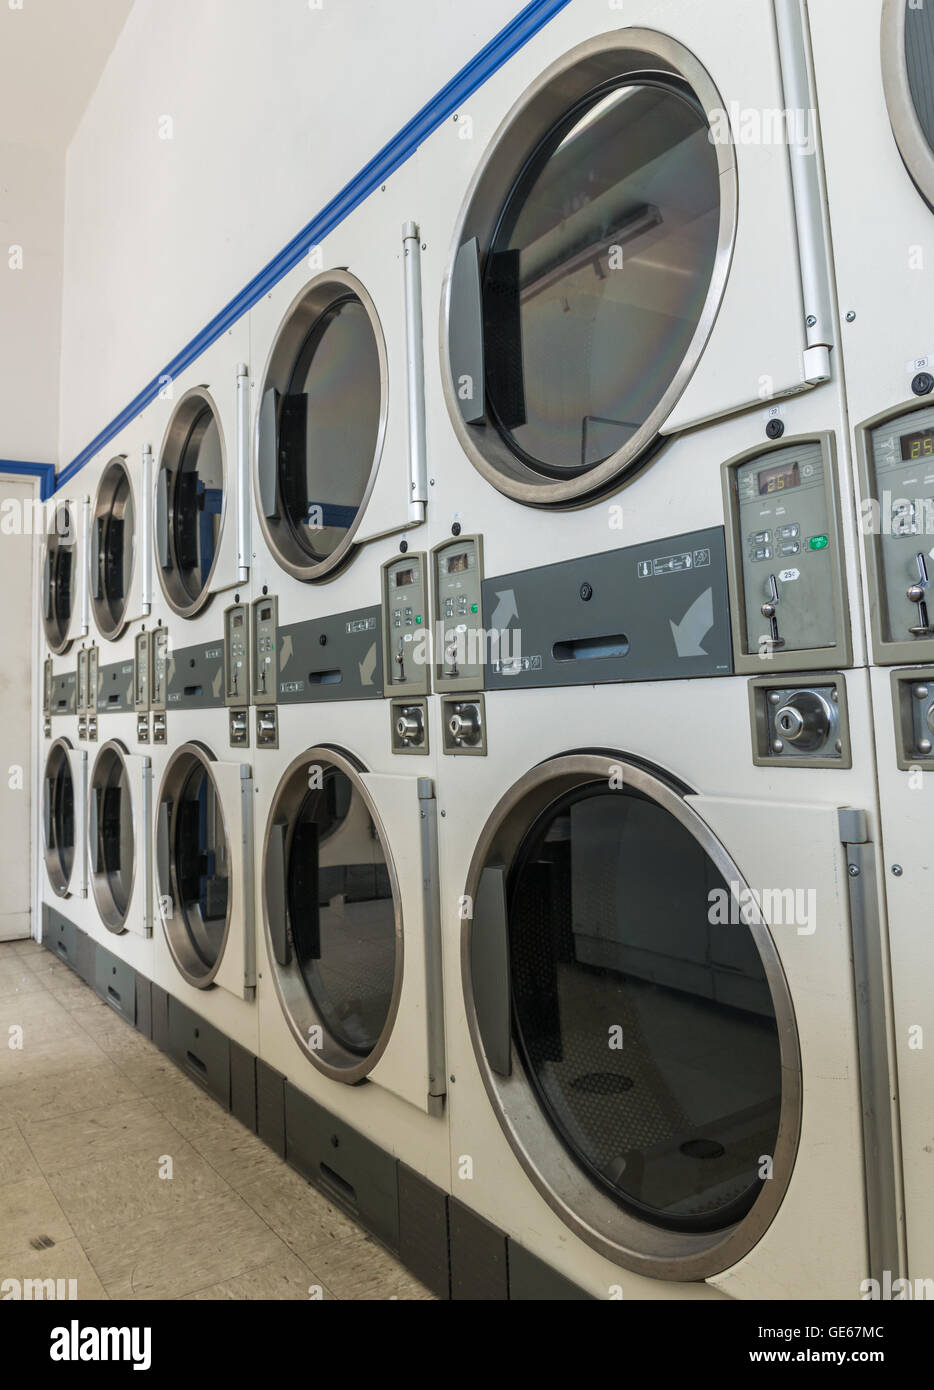 industrial laundry machines in laundrette Stock Photo